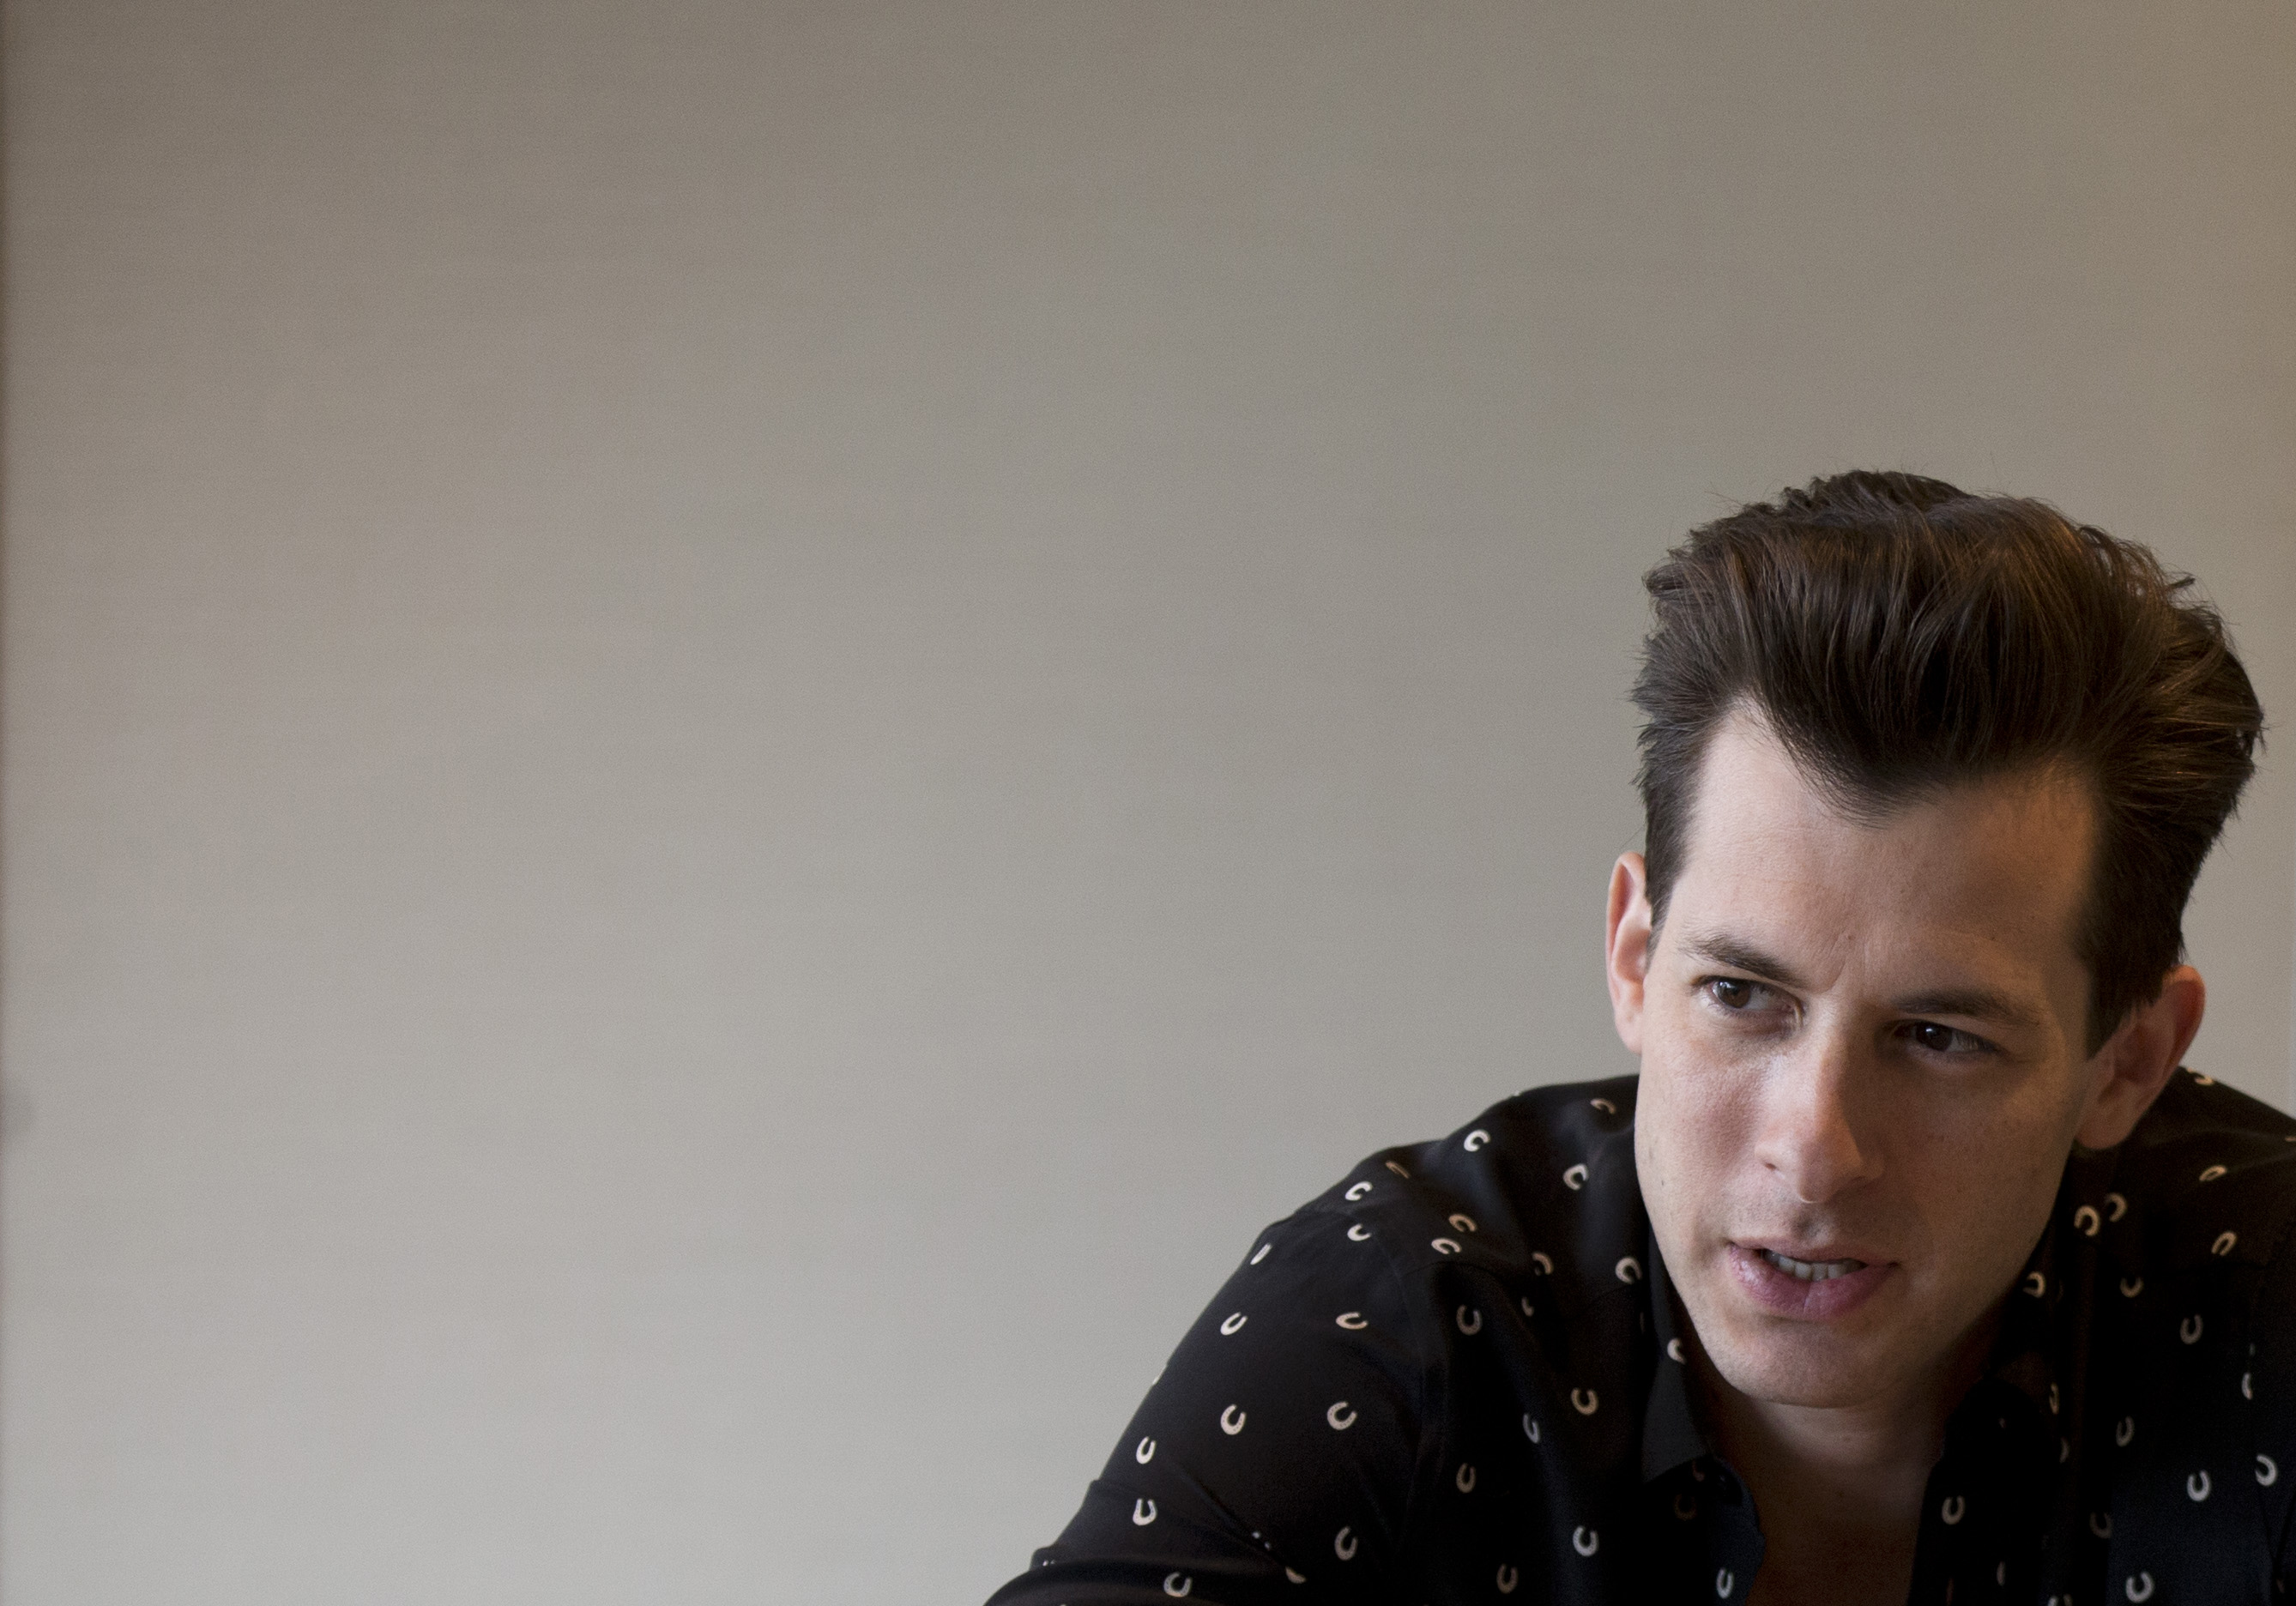 British music producer and DJ Mark Ronson speaks to journalists at a media event in Mexico City, on April 17, 2015. (Rebecca Blackwell—AP)